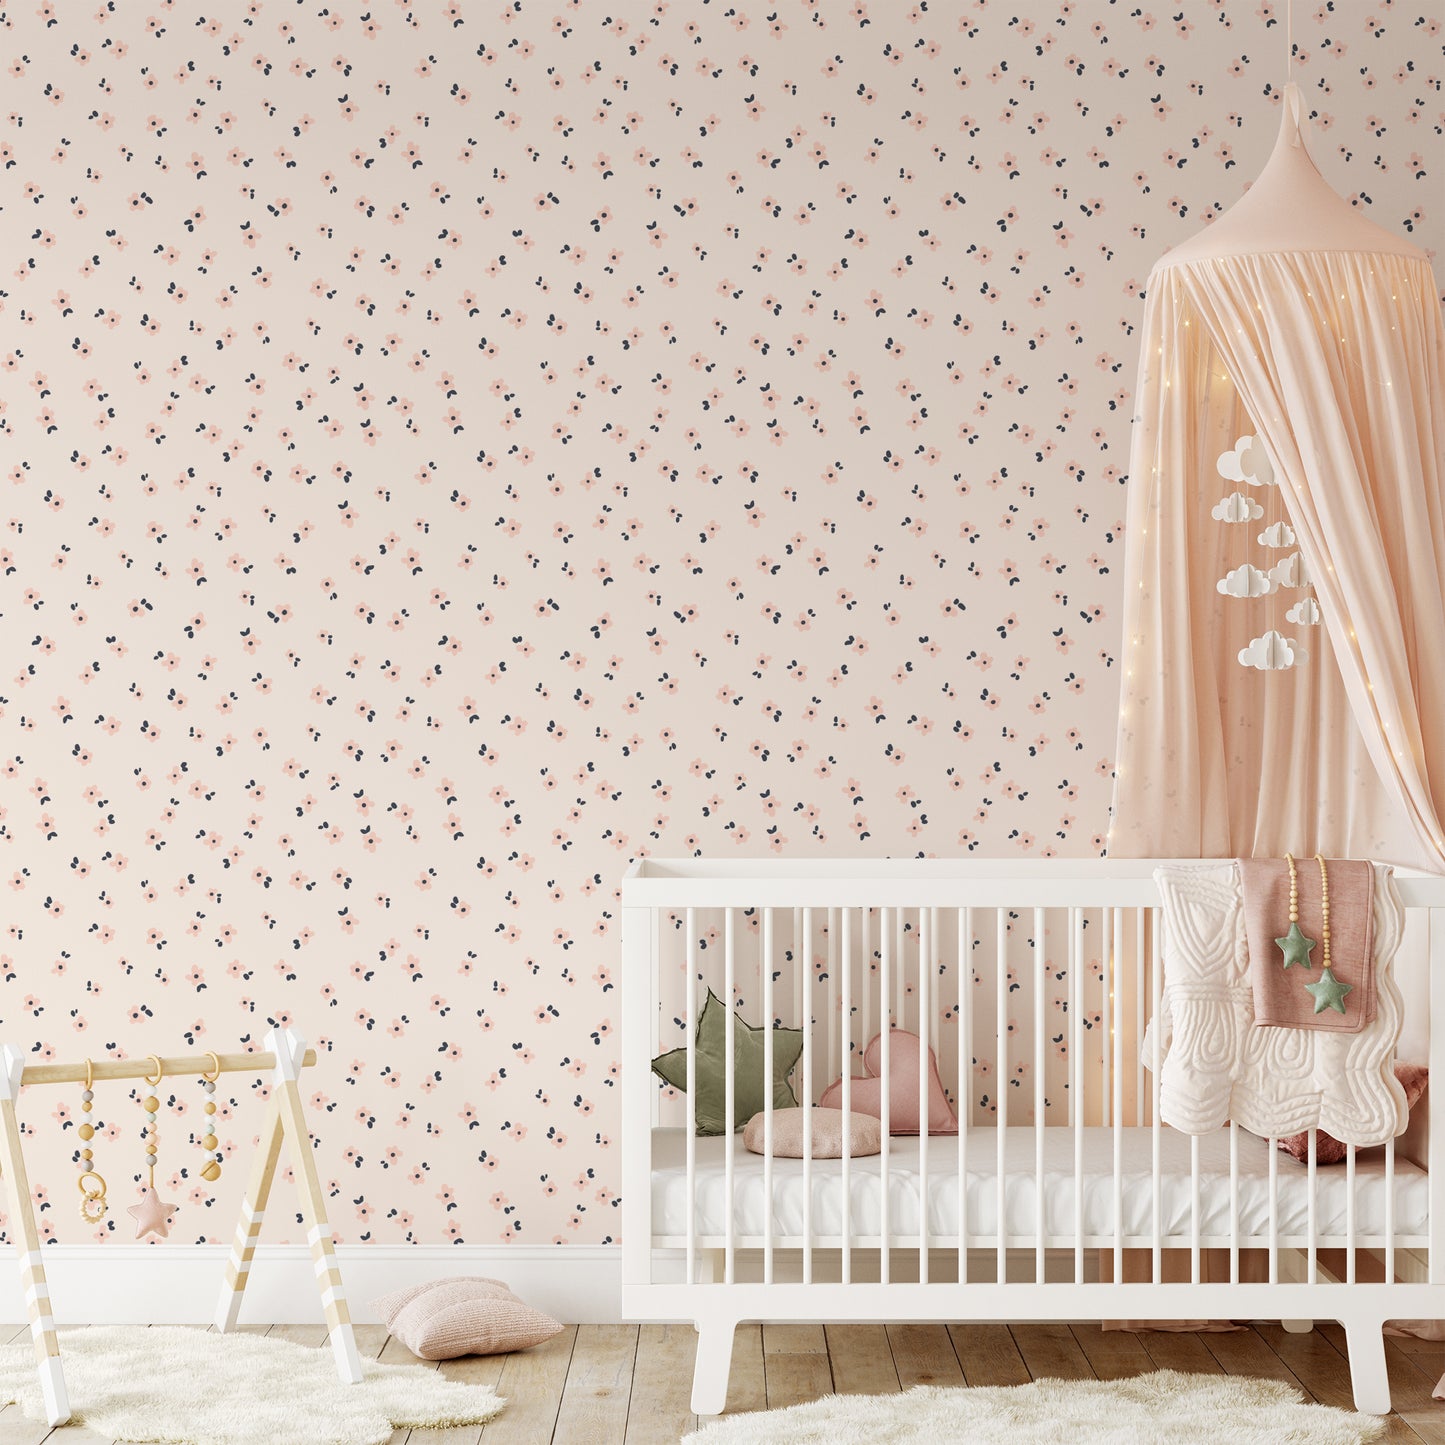 Our Snow in Summer removable peel and stick wallpaper in Blush showcased in a nursery.